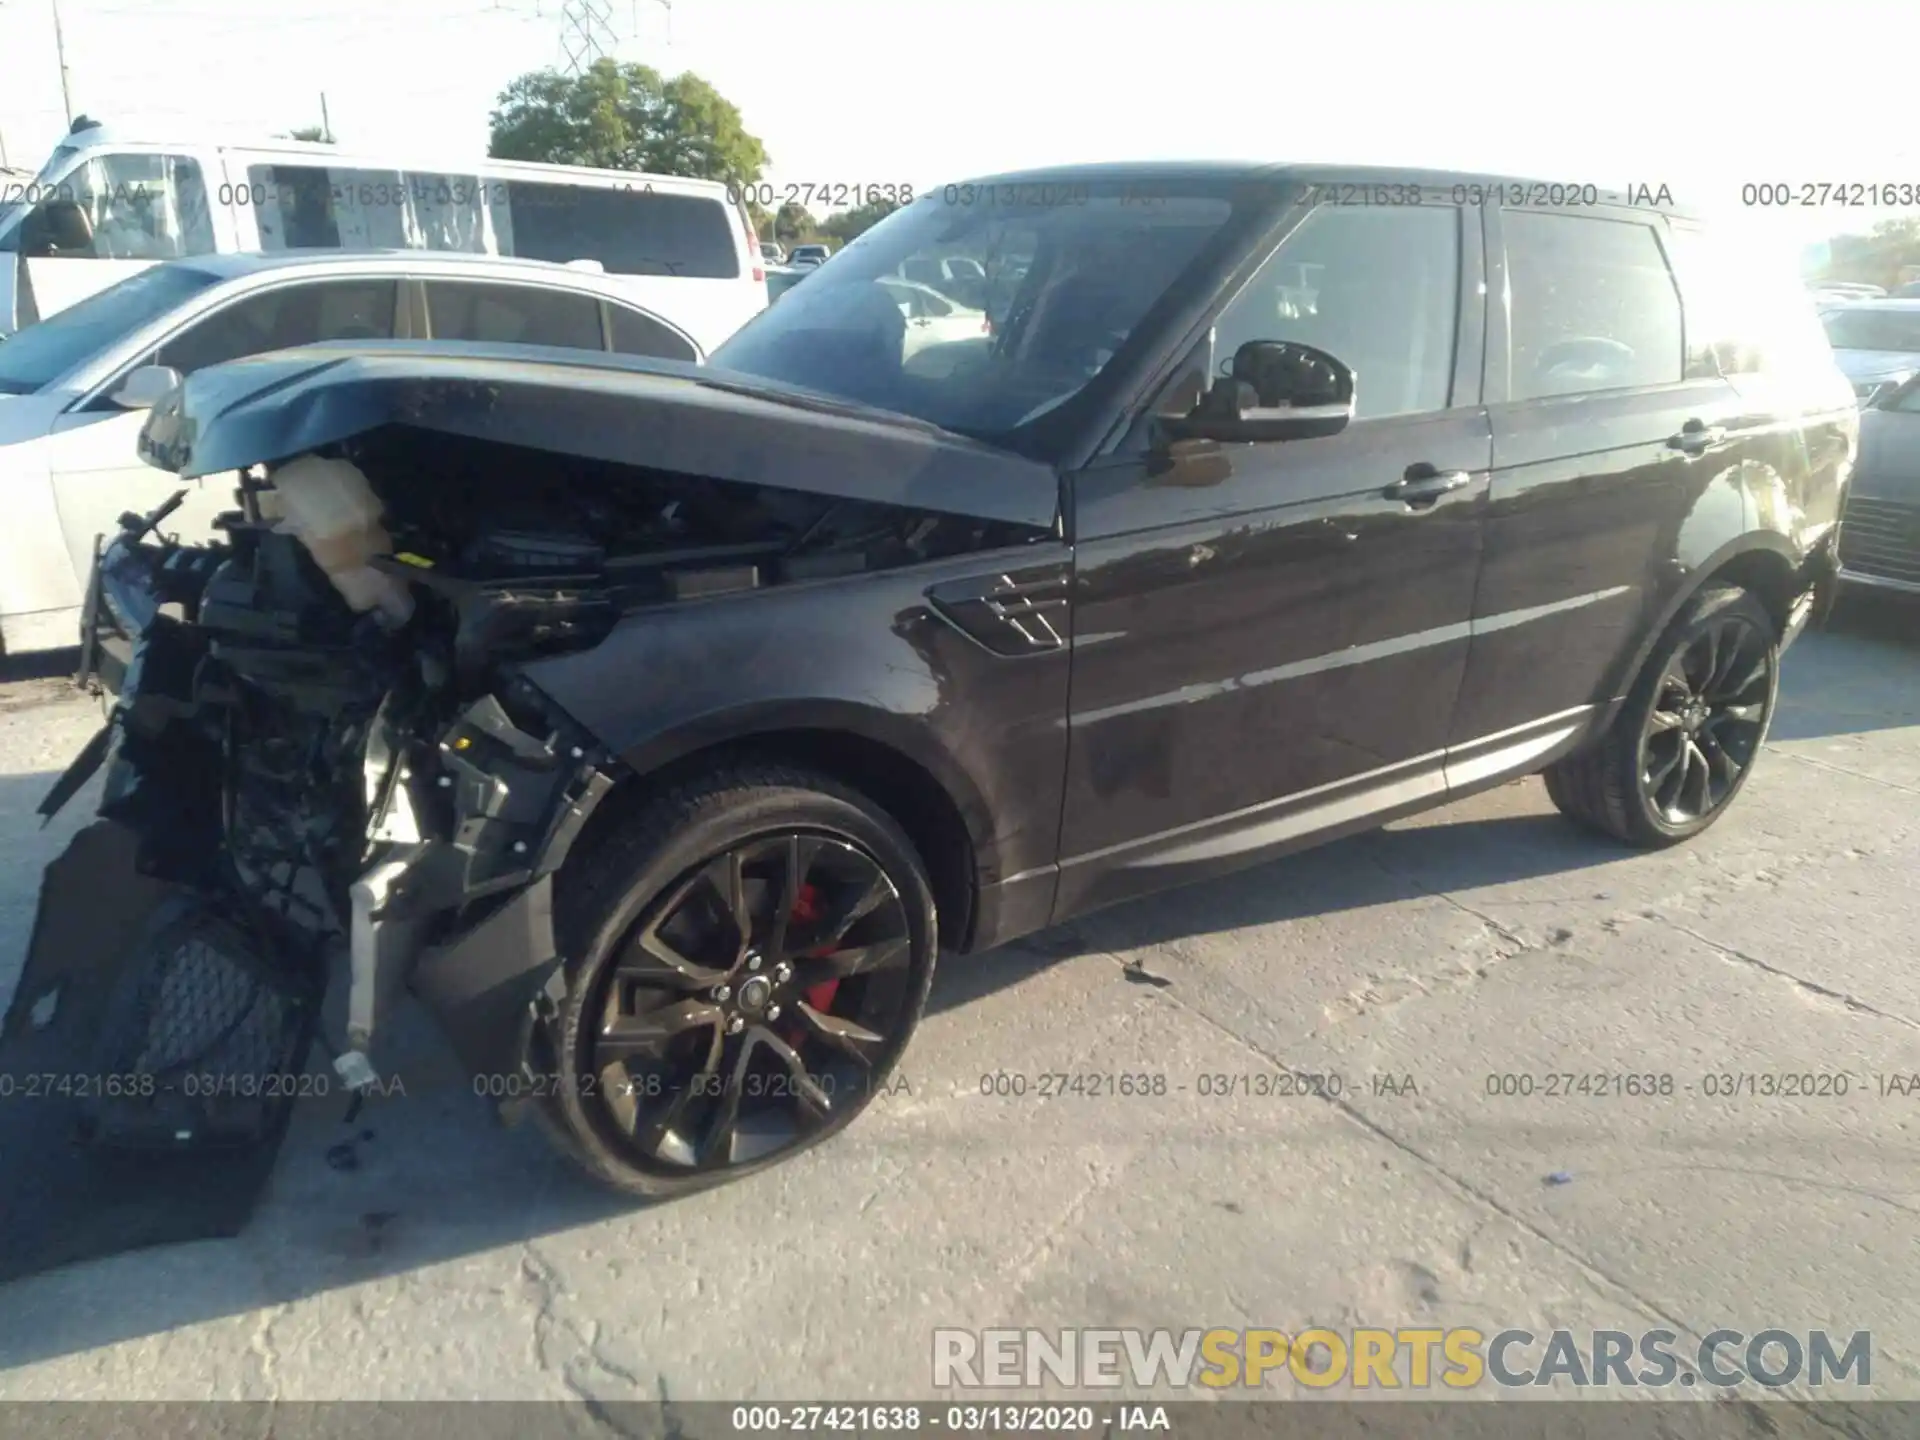 2 Photograph of a damaged car SALWG2RVXKA423559 LAND ROVER RANGE ROVER SPORT 2019